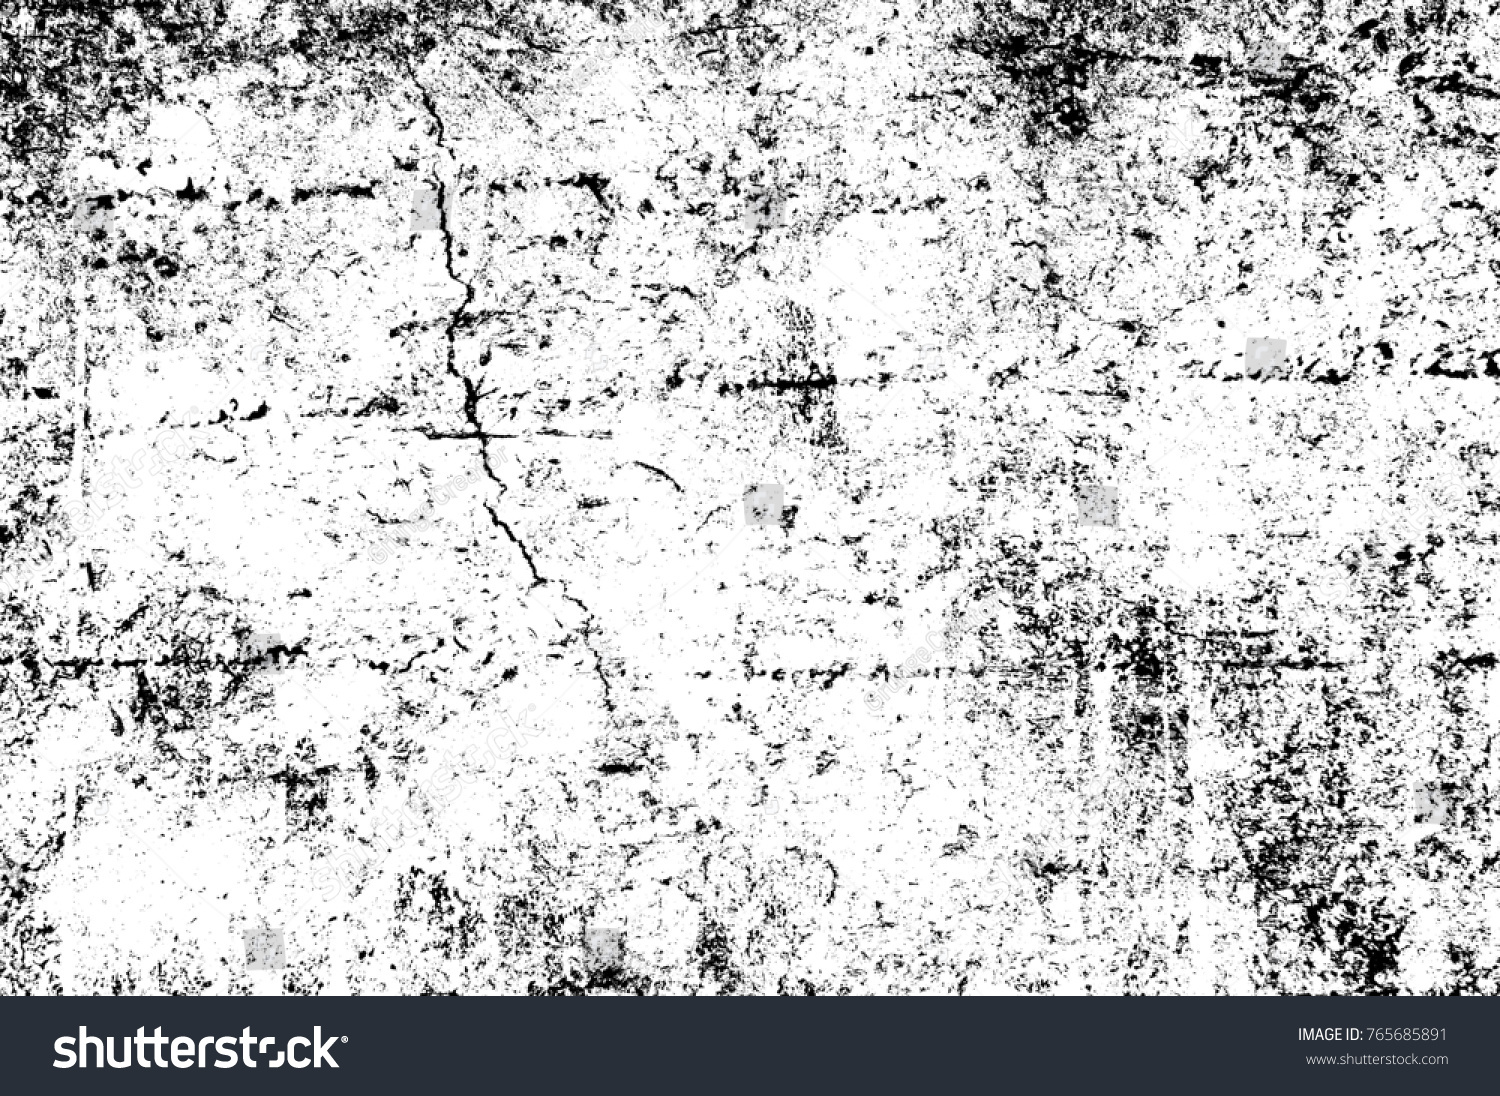 Grunge black and white pattern. Monochrome particles abstract texture. Background of cracks, scuffs, chips, stains, ink spots, lines. Dark design background surface. Gray printing element #765685891